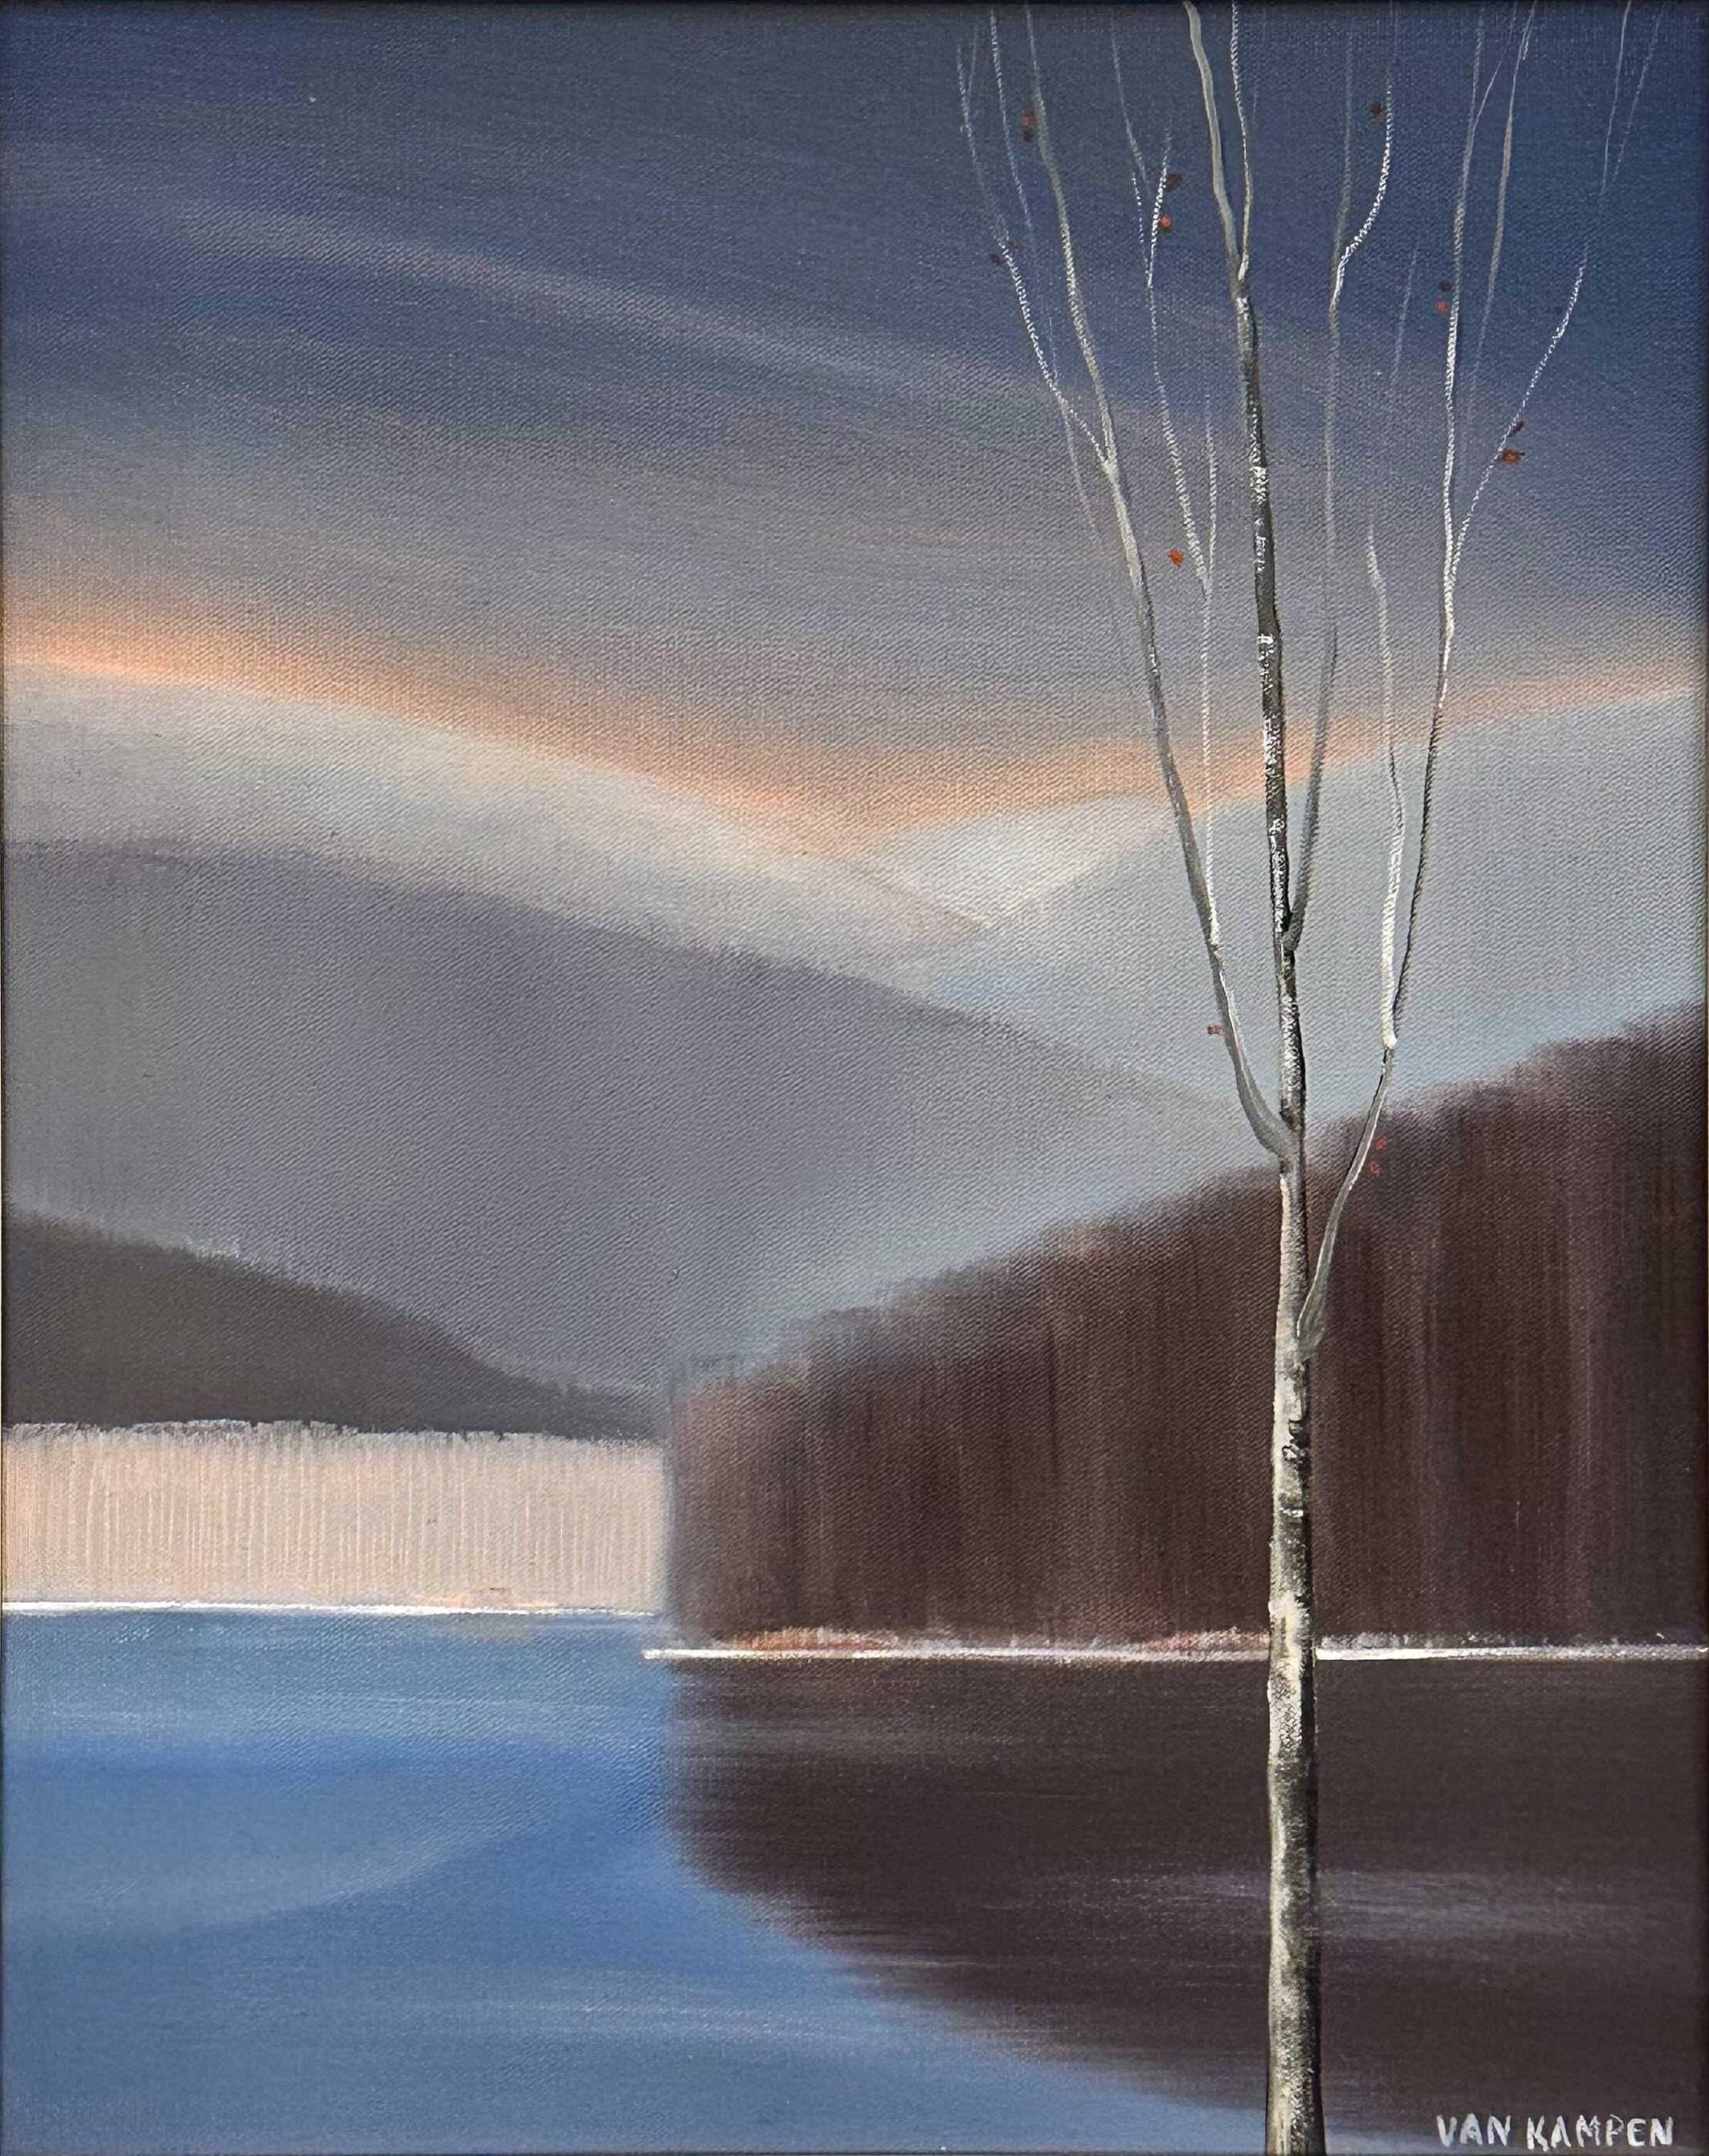 Contemporary Art. Title: Winter, Oil on Canvas, 20 x 16 in by Canadian artist Katherine van Kampen.